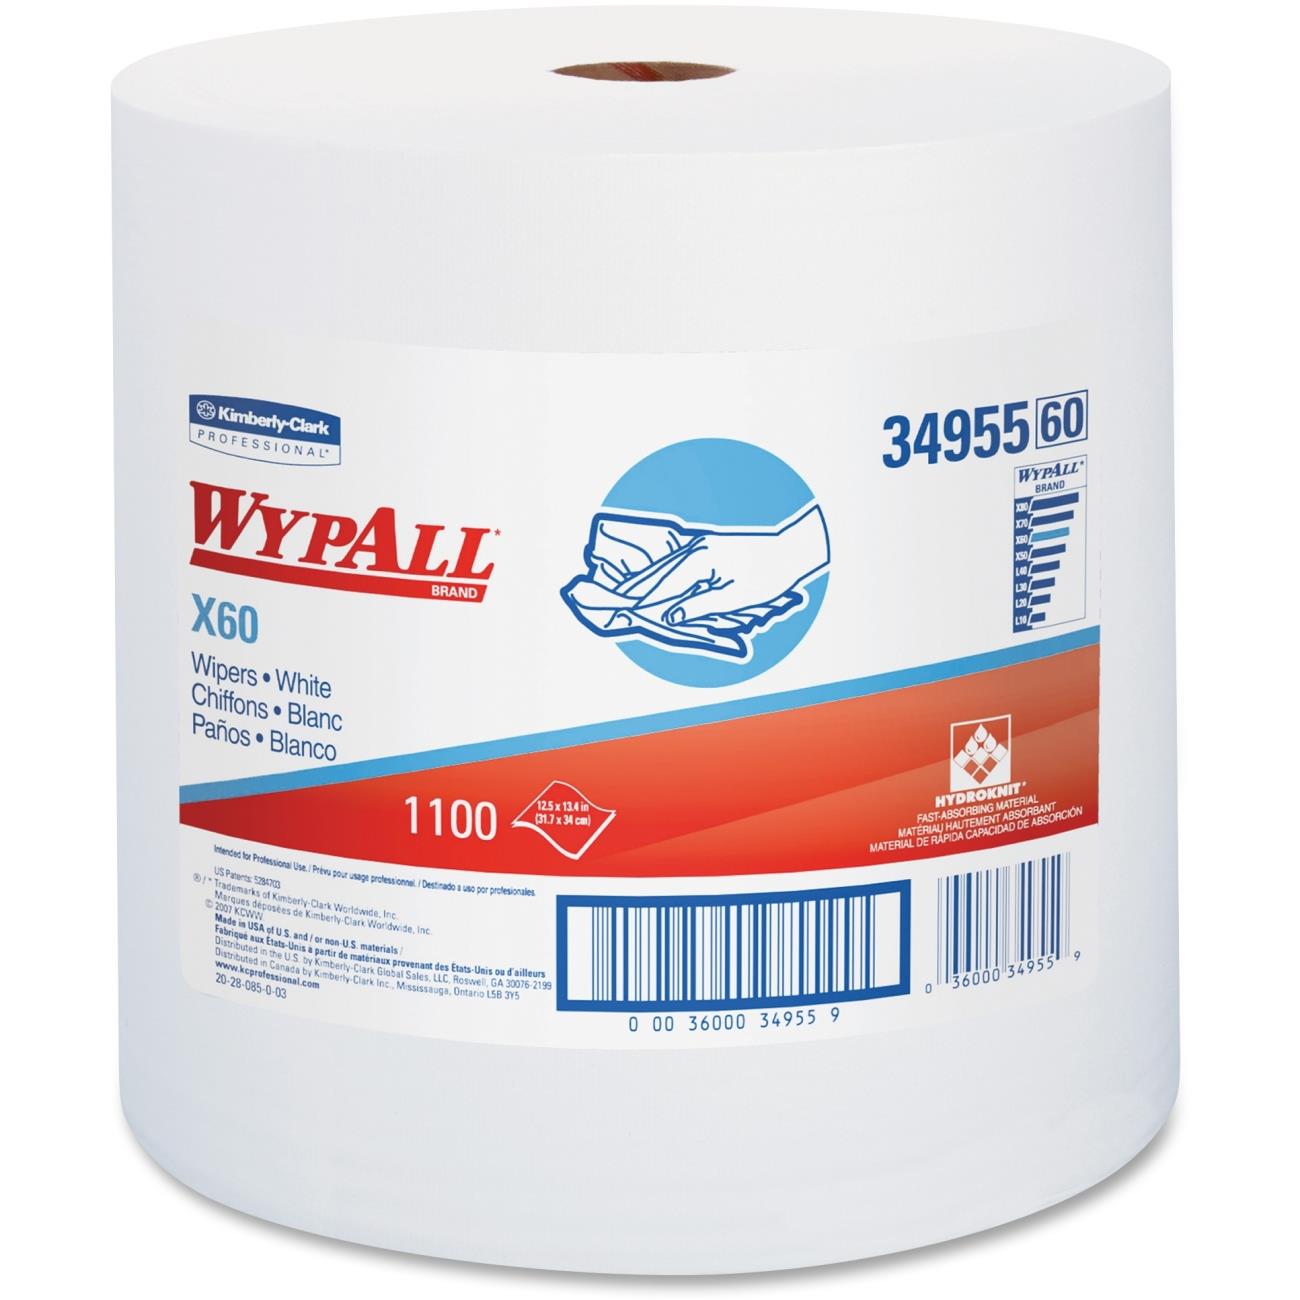 WYPALL X60 JUMBO ROLL WHITE 1100 WIPERS - WYPALL X60